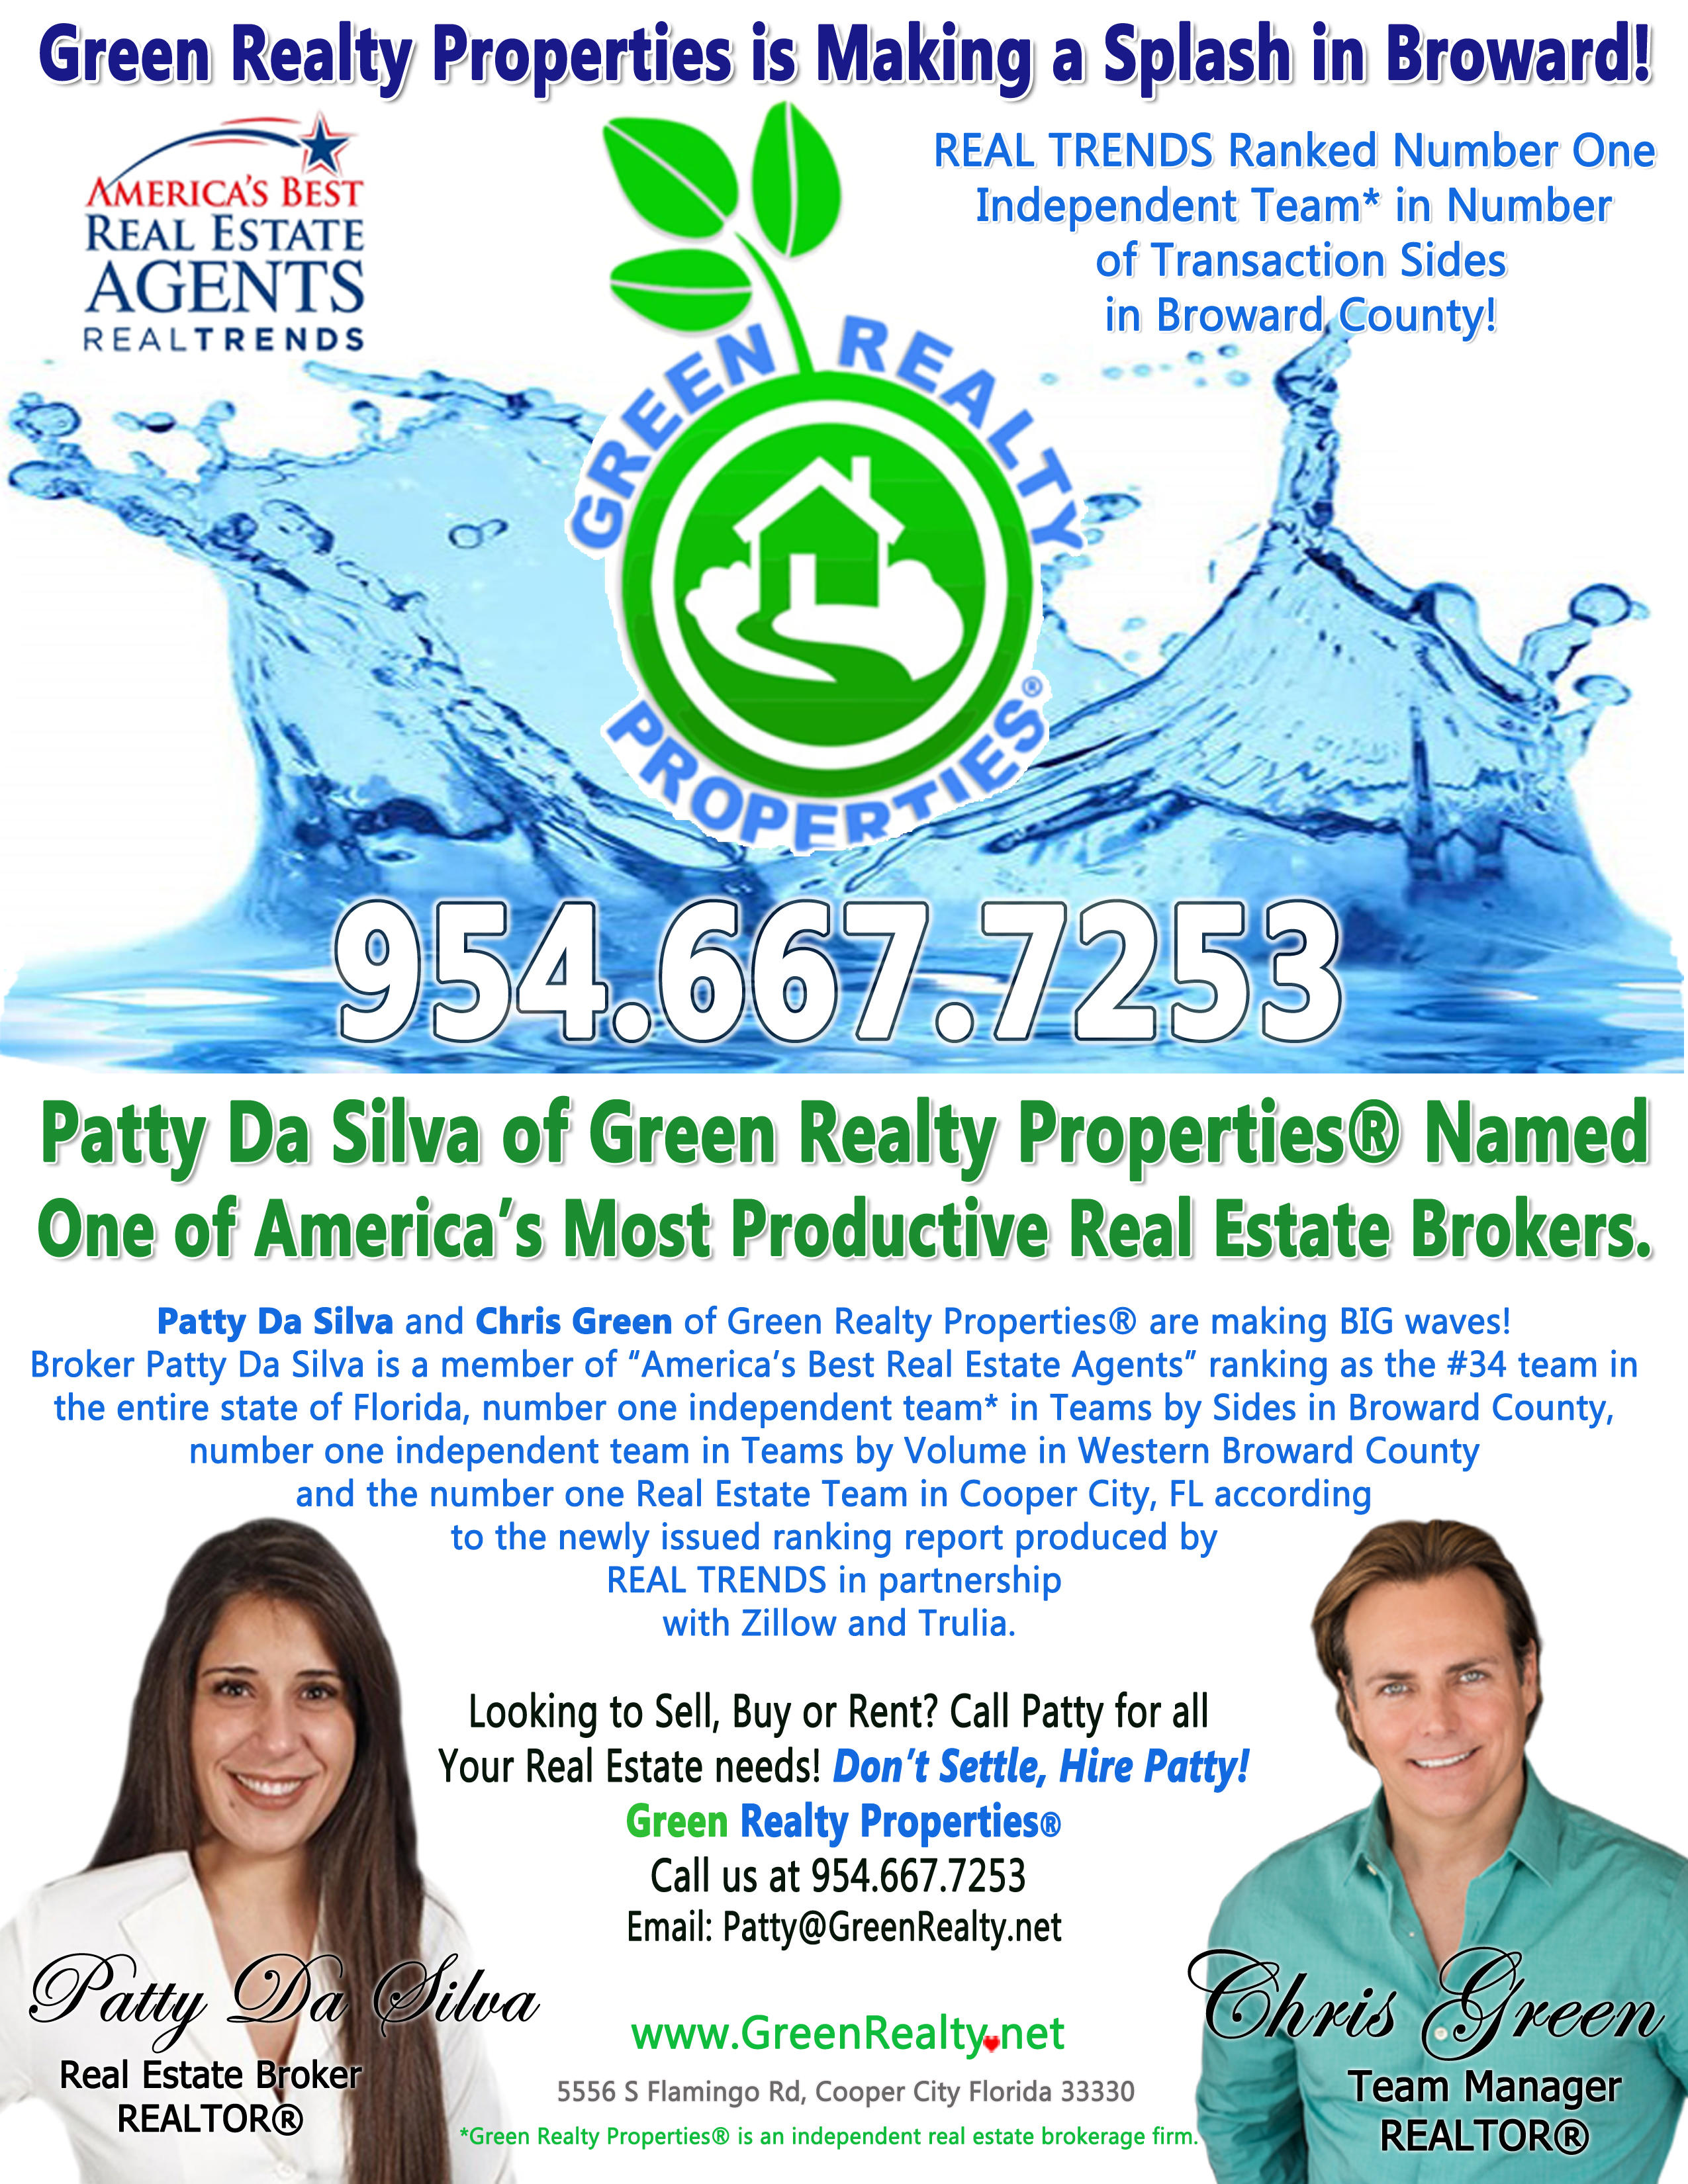 America's Best Real Estate Agents - REALTRENDS